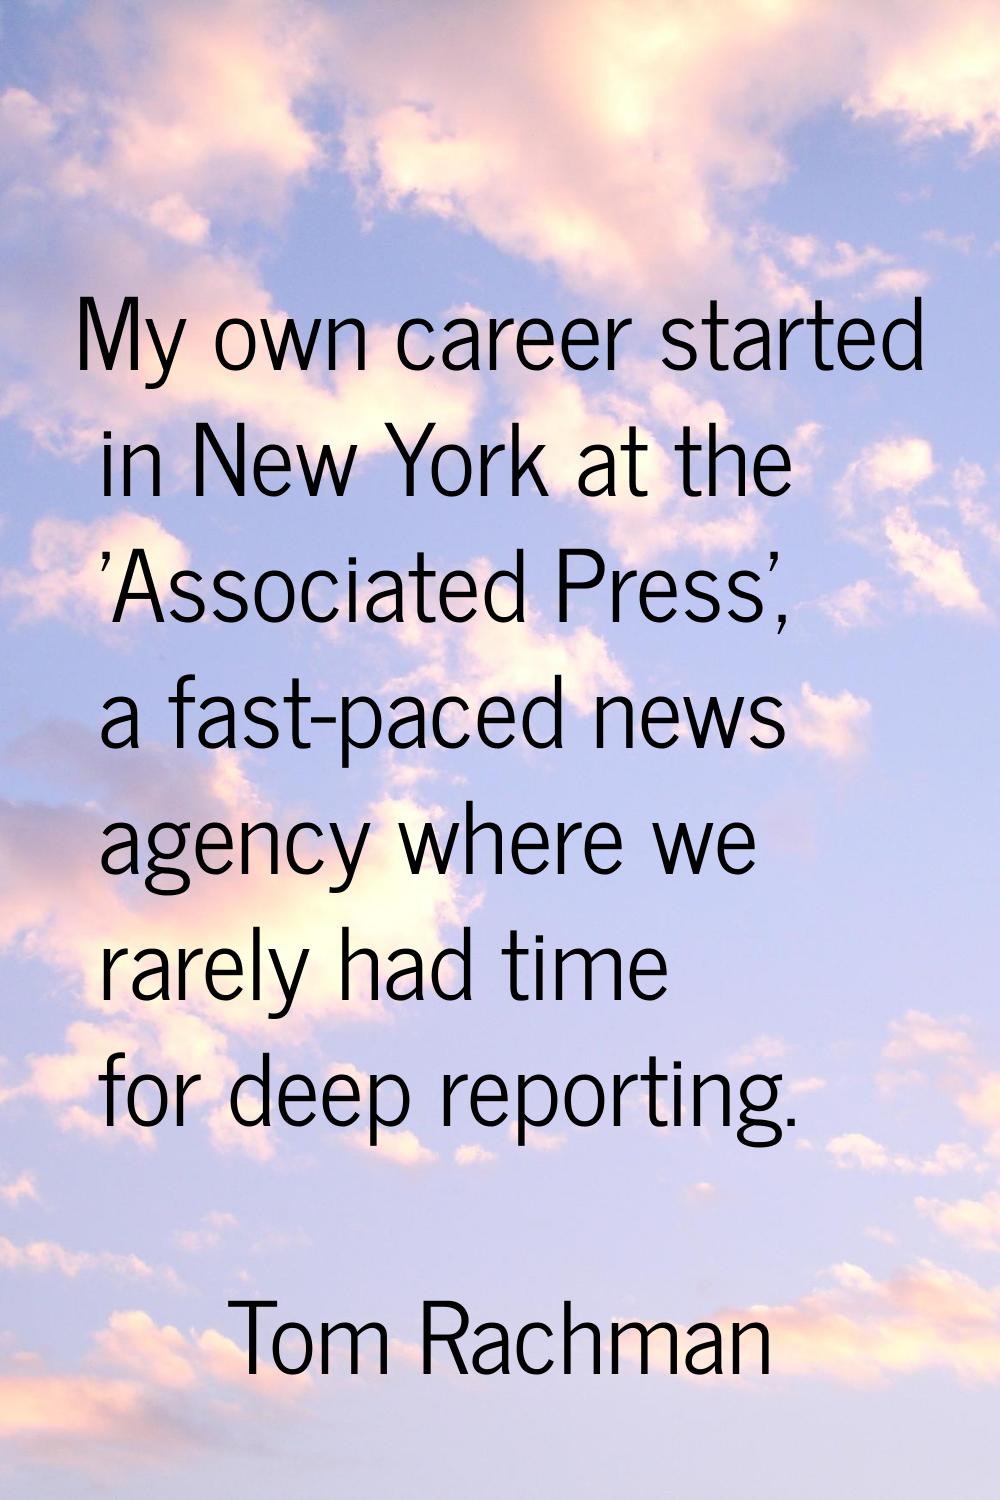 My own career started in New York at the 'Associated Press', a fast-paced news agency where we rare